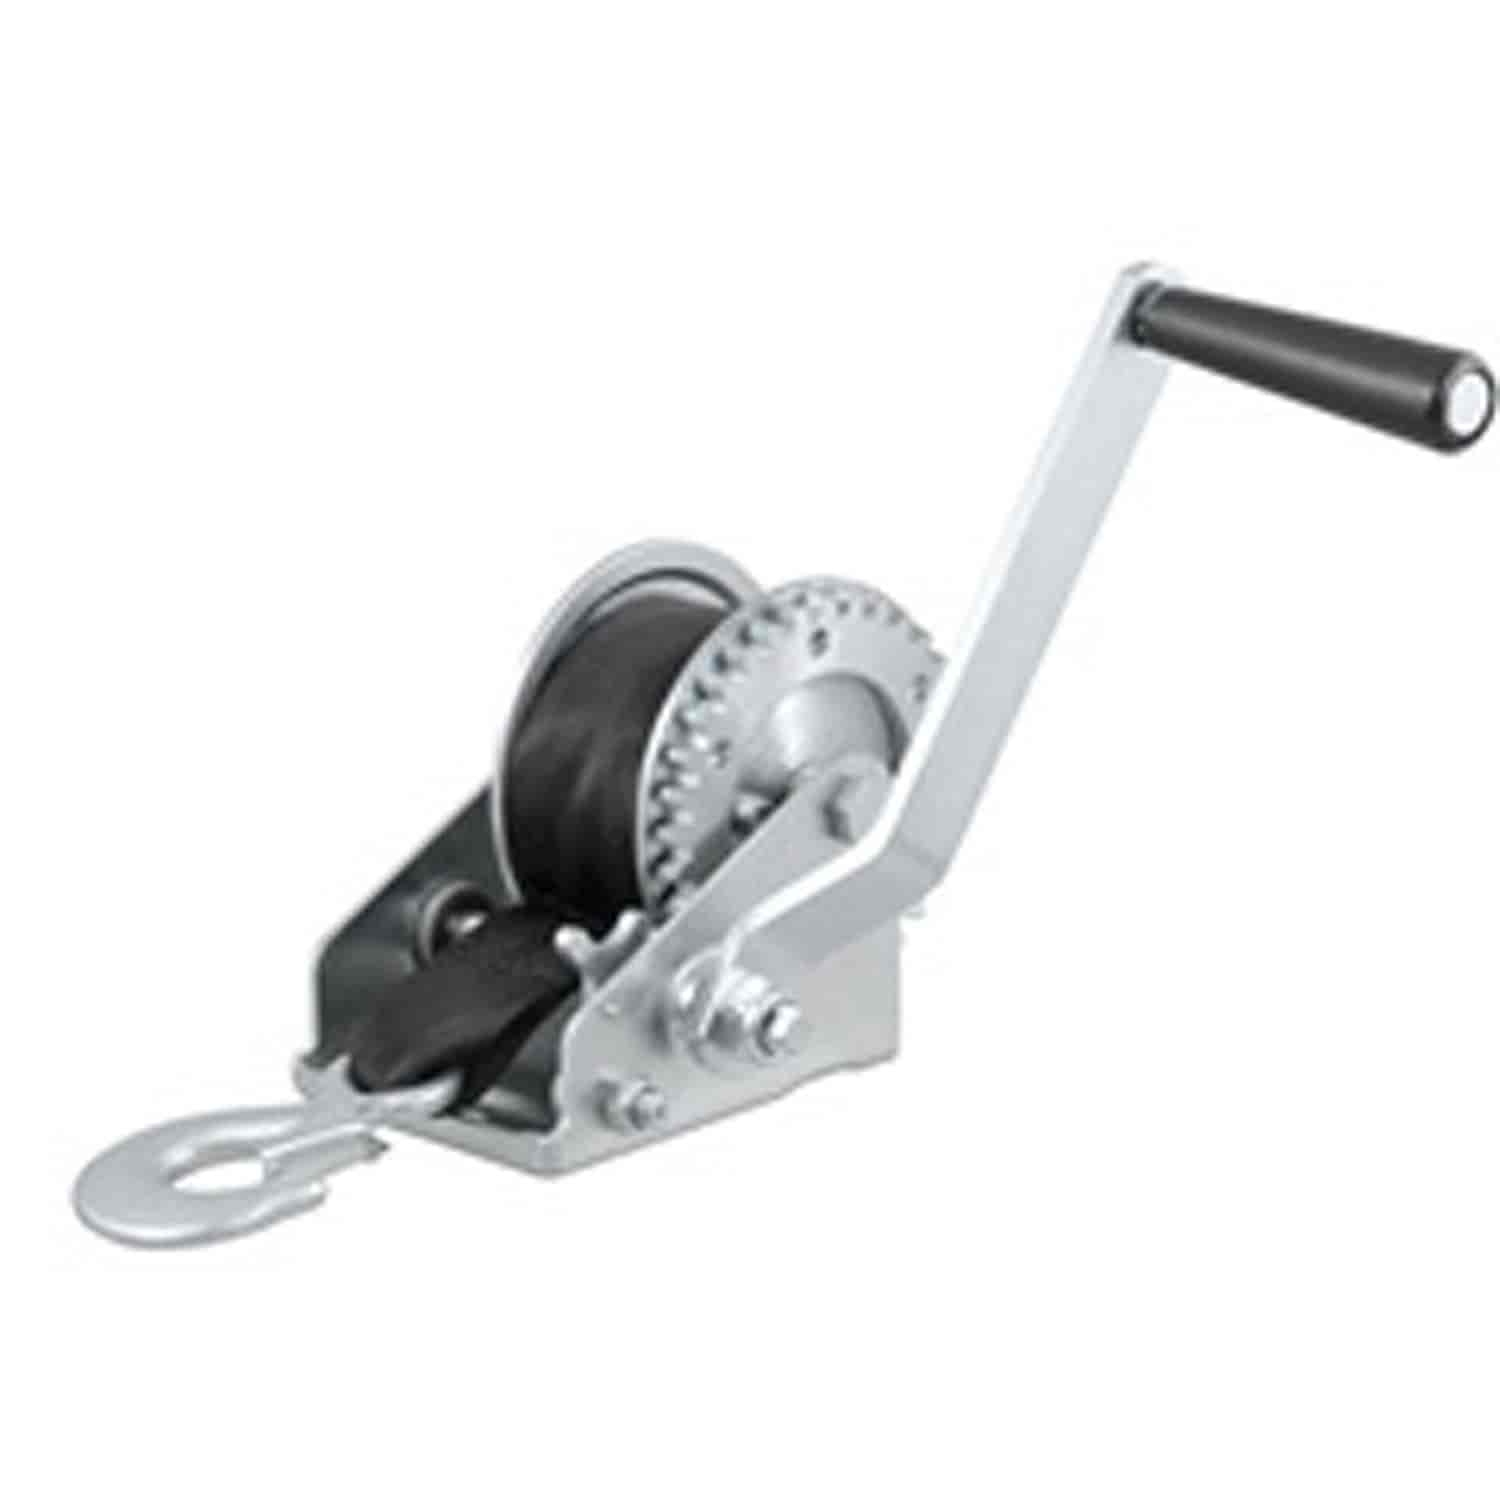 HAND WINCH 900 LB CAPACITY WITH 15 STRAP